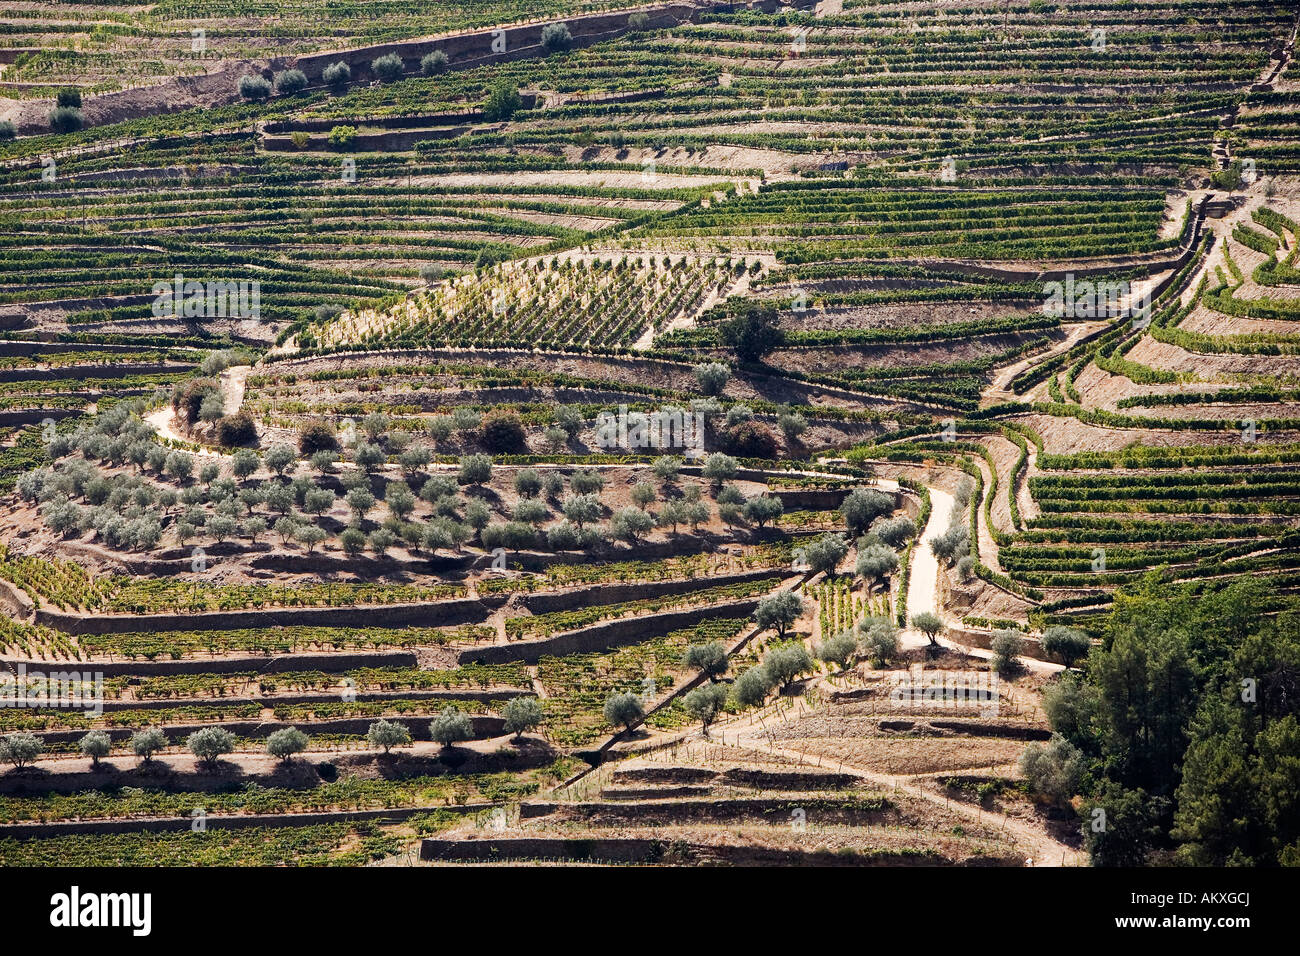 Detail of vineyards in the Douro Valley, Northern Portugal Stock Photo